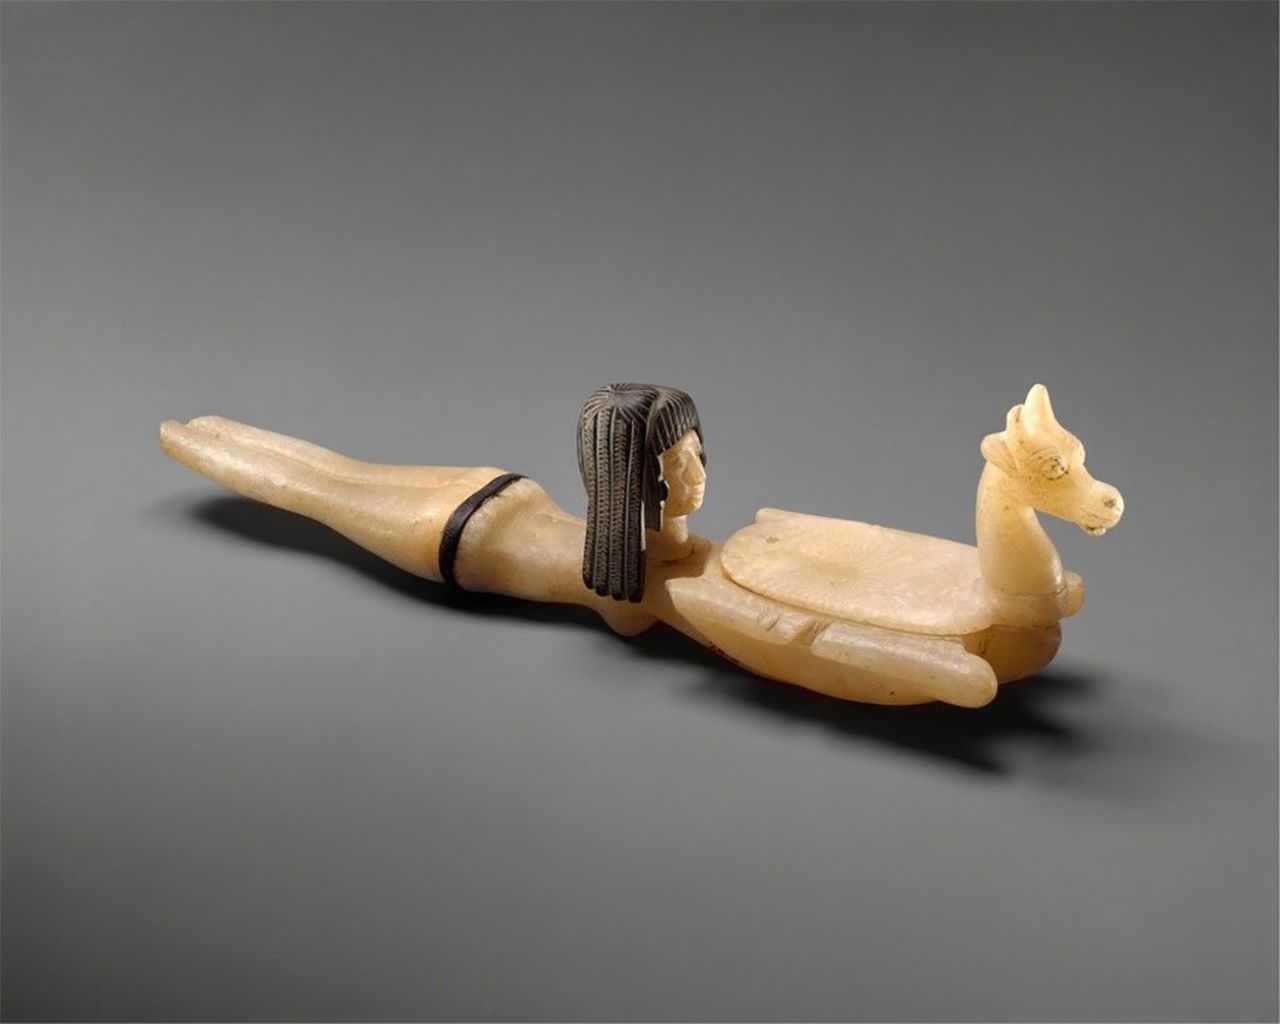 Cosmetic Spoon in the Shape of Swimming Woman Holding a Dish, ca. 1390-1352 B.C.